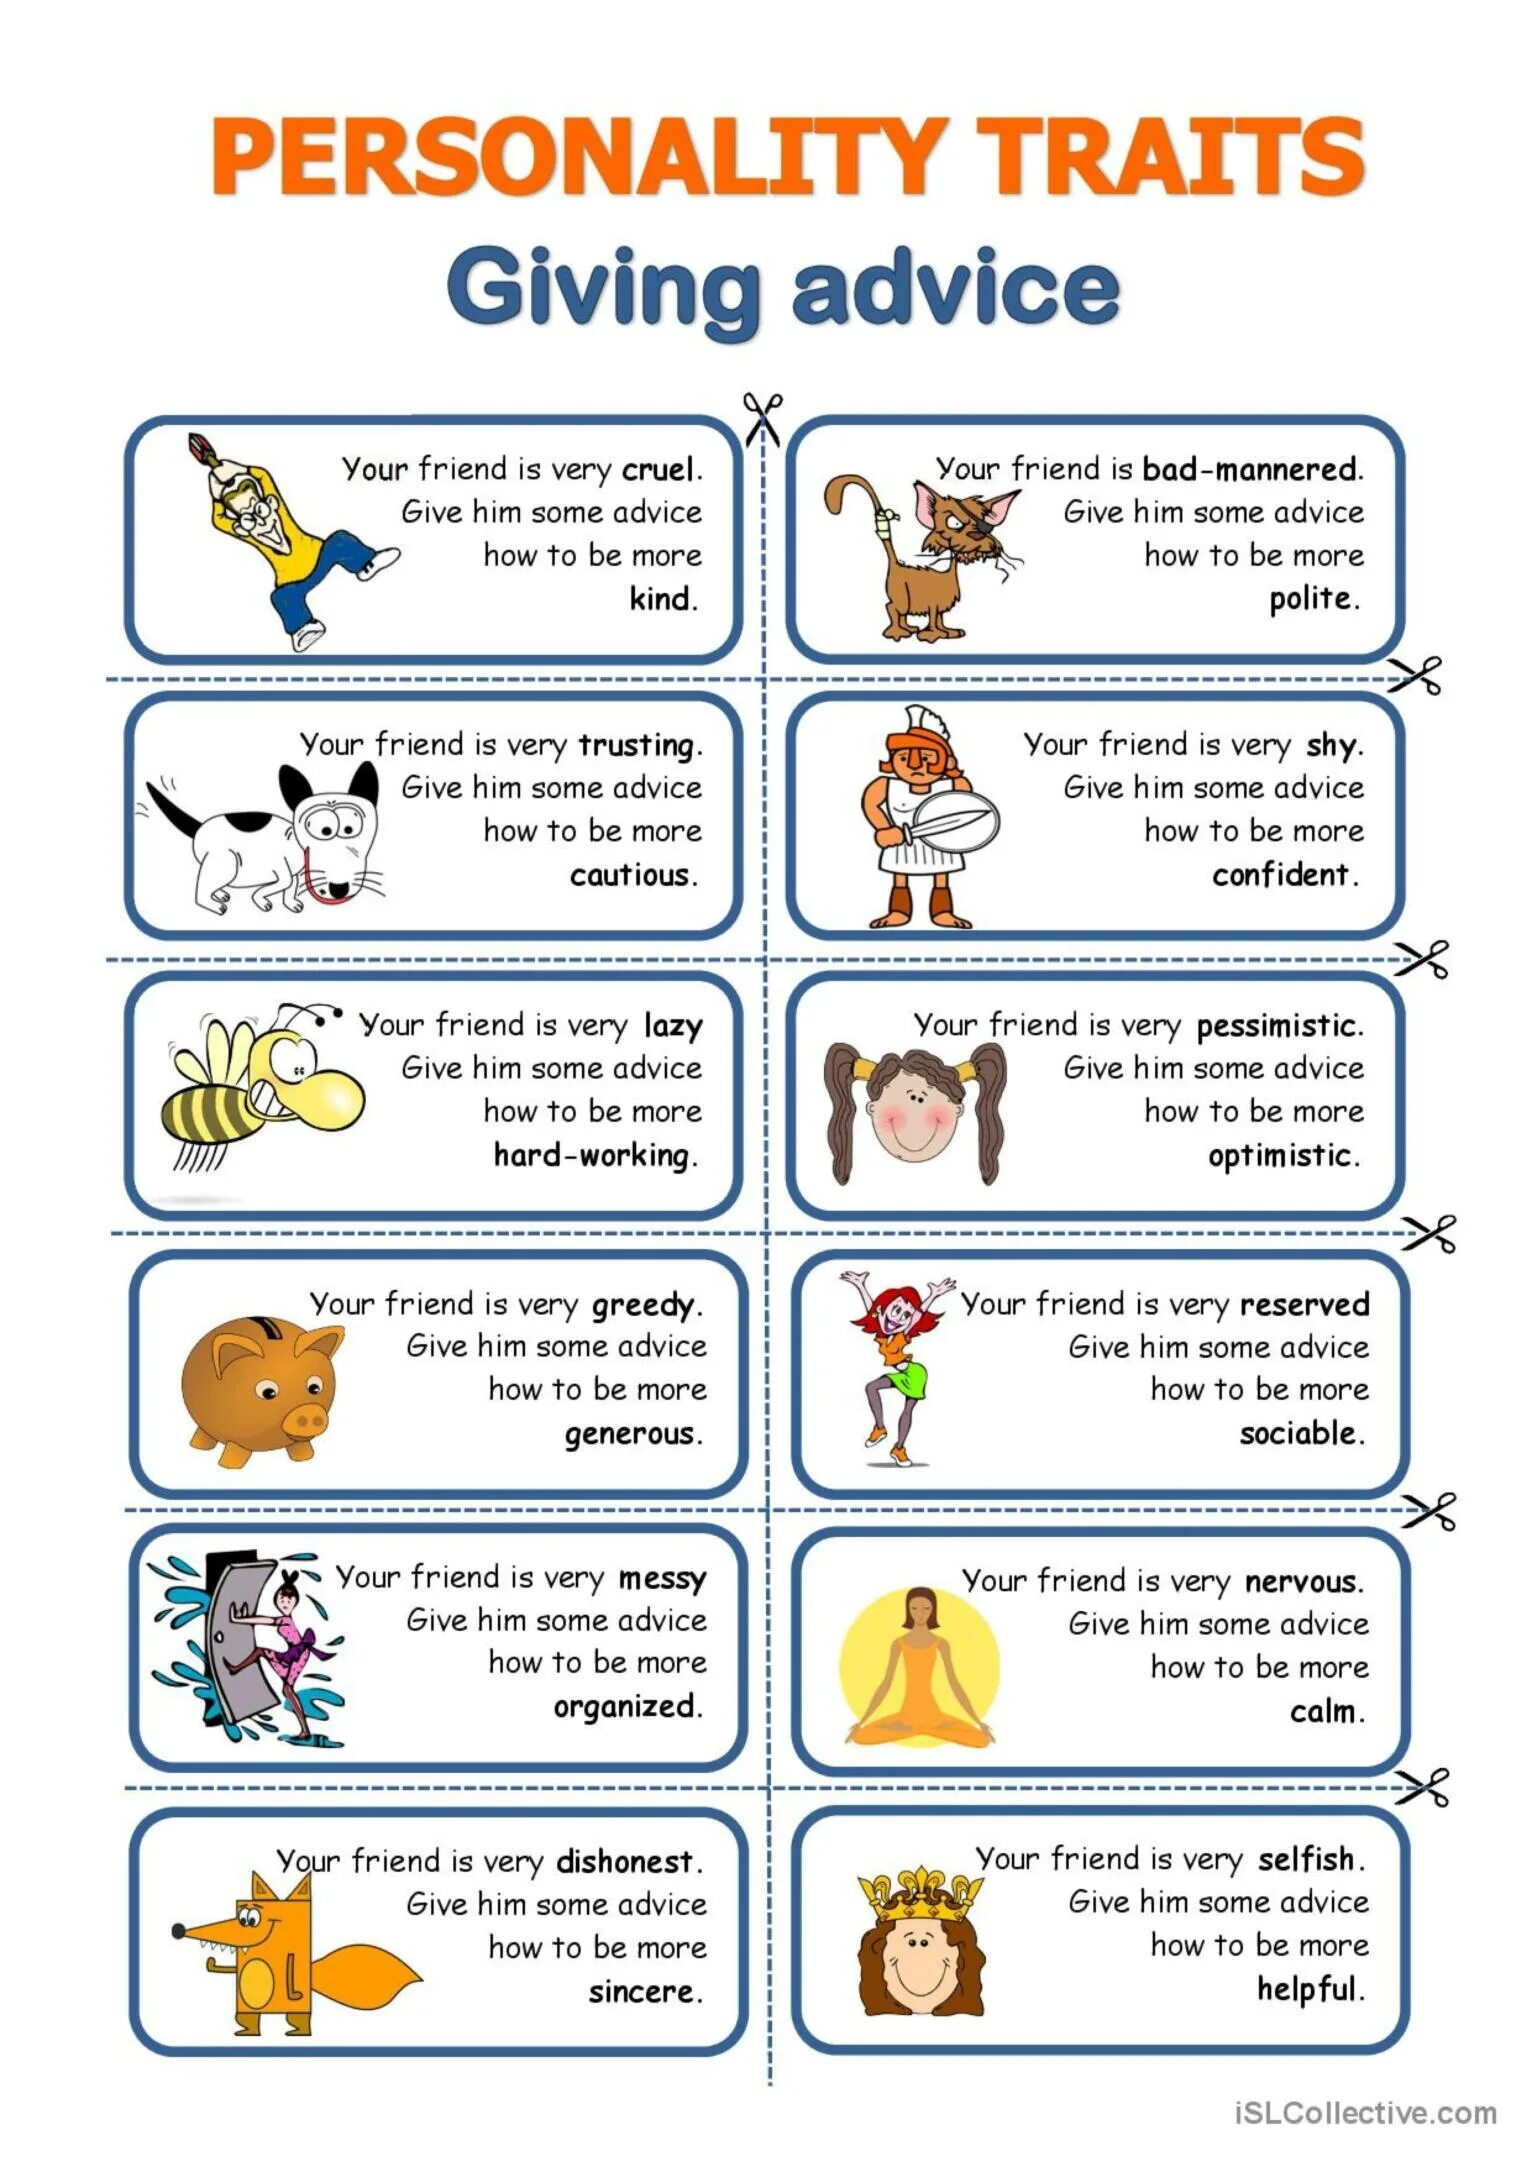 Английский speaking Worksheet. Personality traits giving advice. Speaking Cards английскому языку. Английский язык speaking activity. Speaking situations